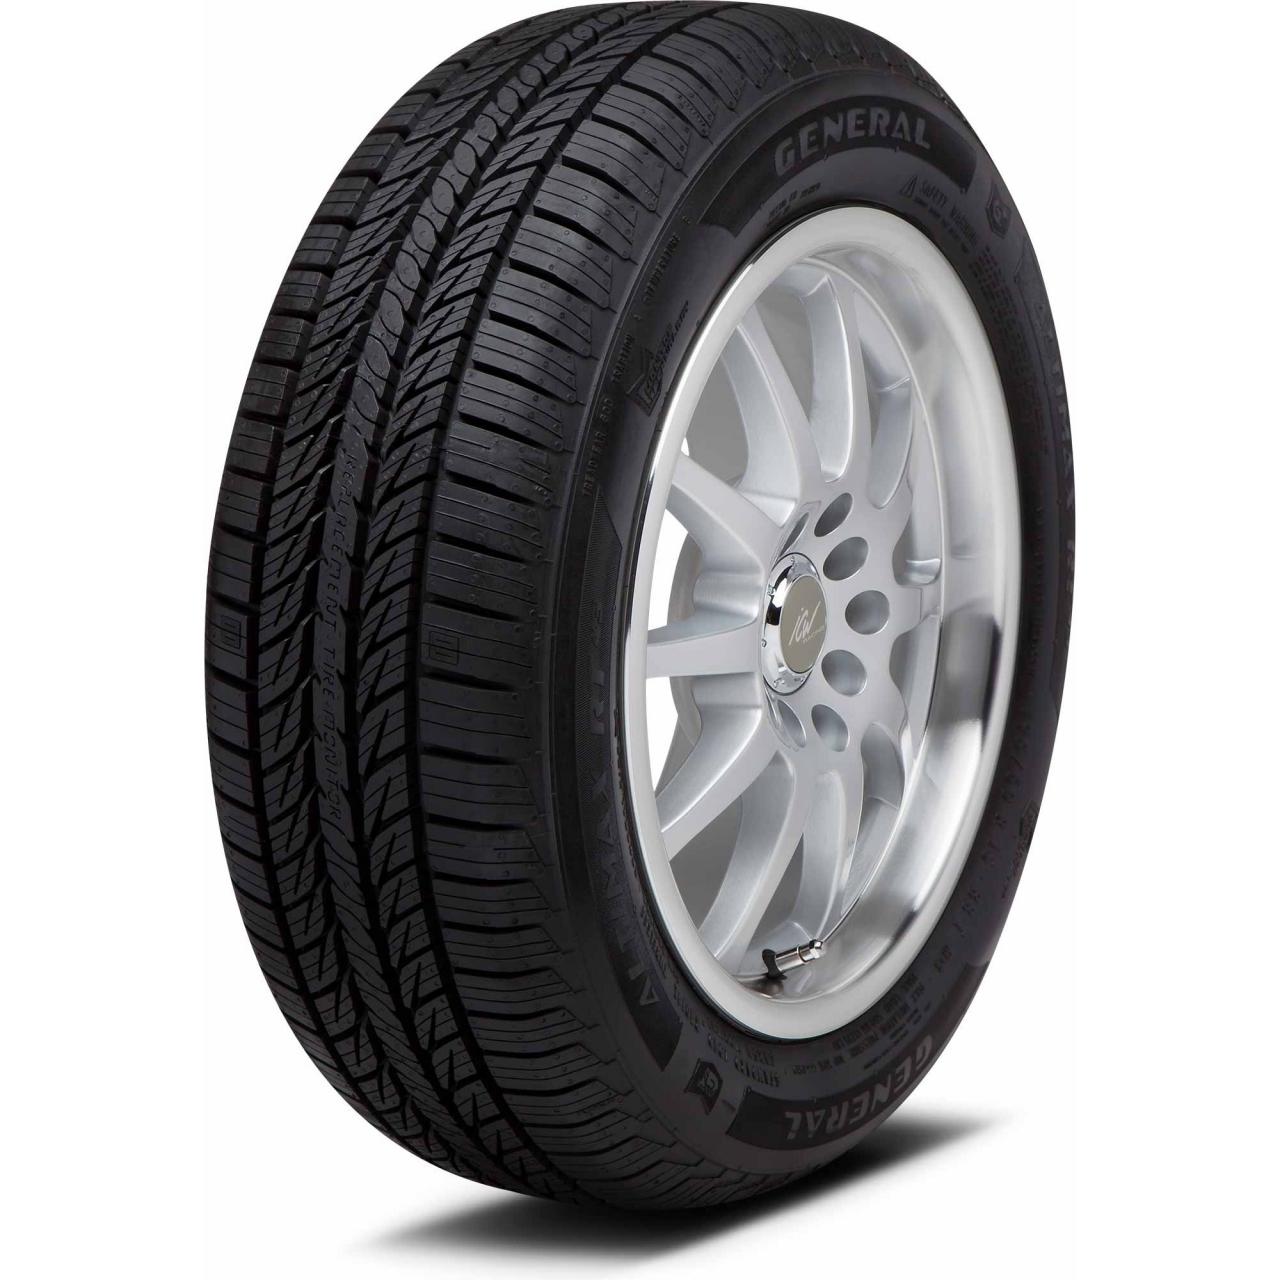 General Altimax RT43 - Tyre Reviews and Tests